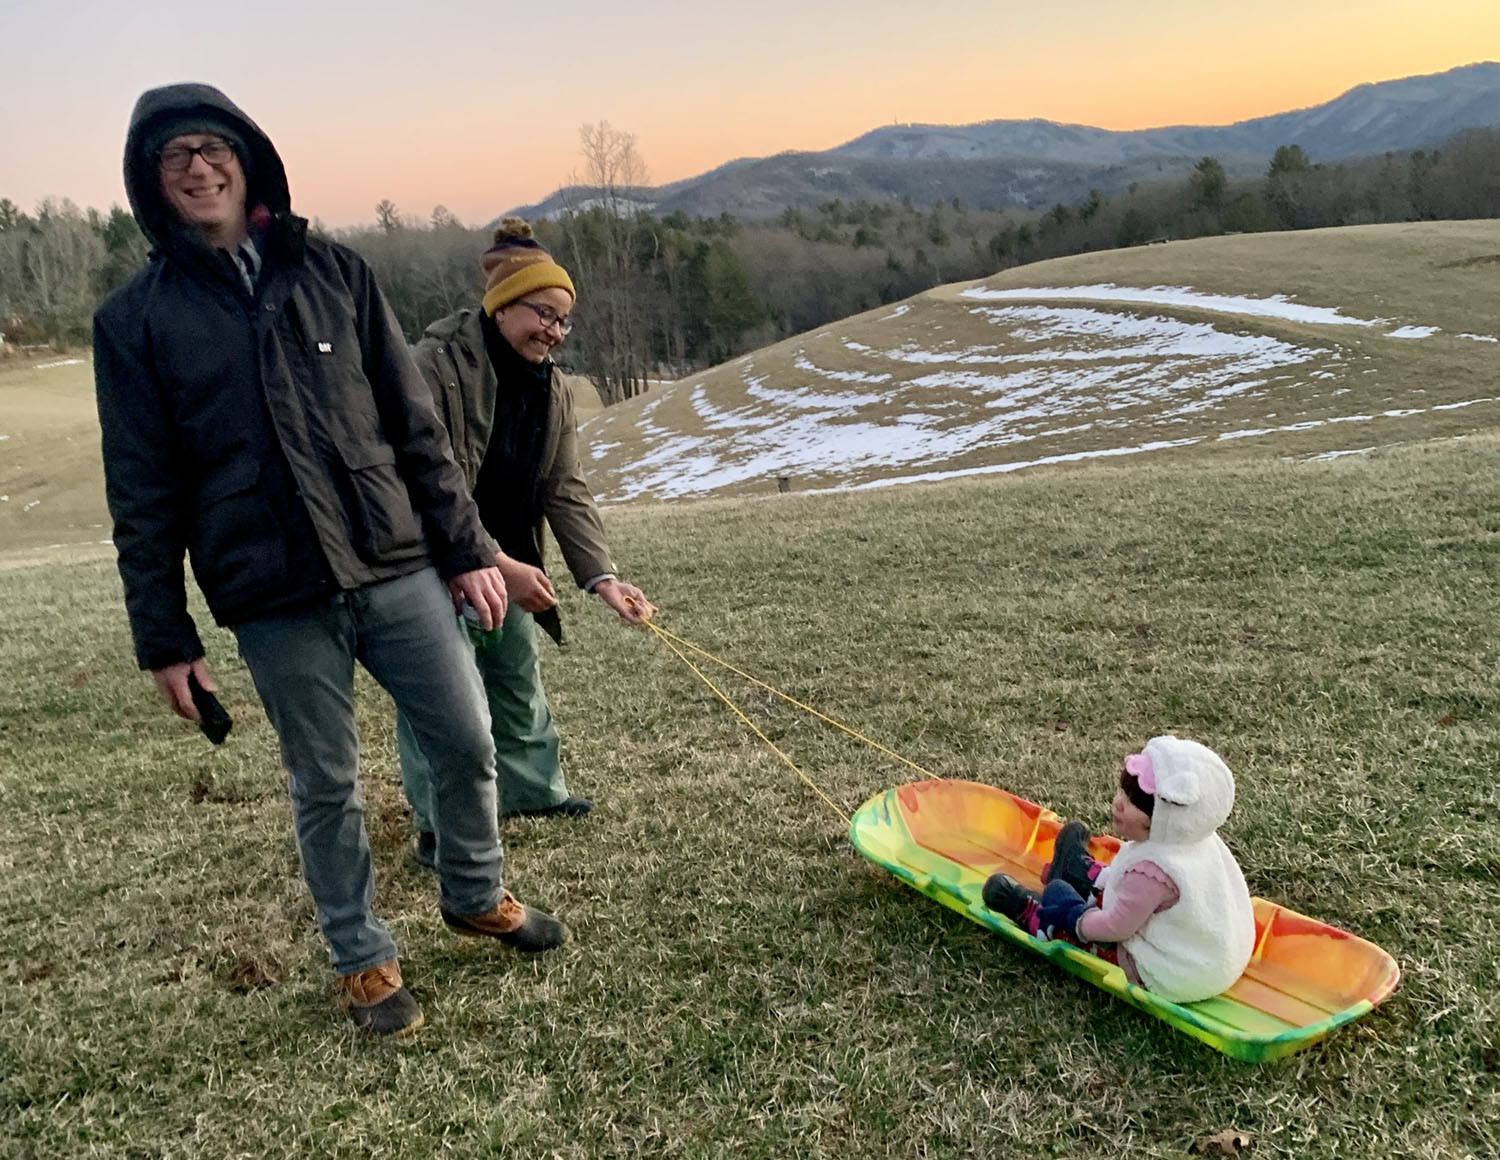 A man and a woman in a grassy field in winter, pulling a sled with a baby sitting in it